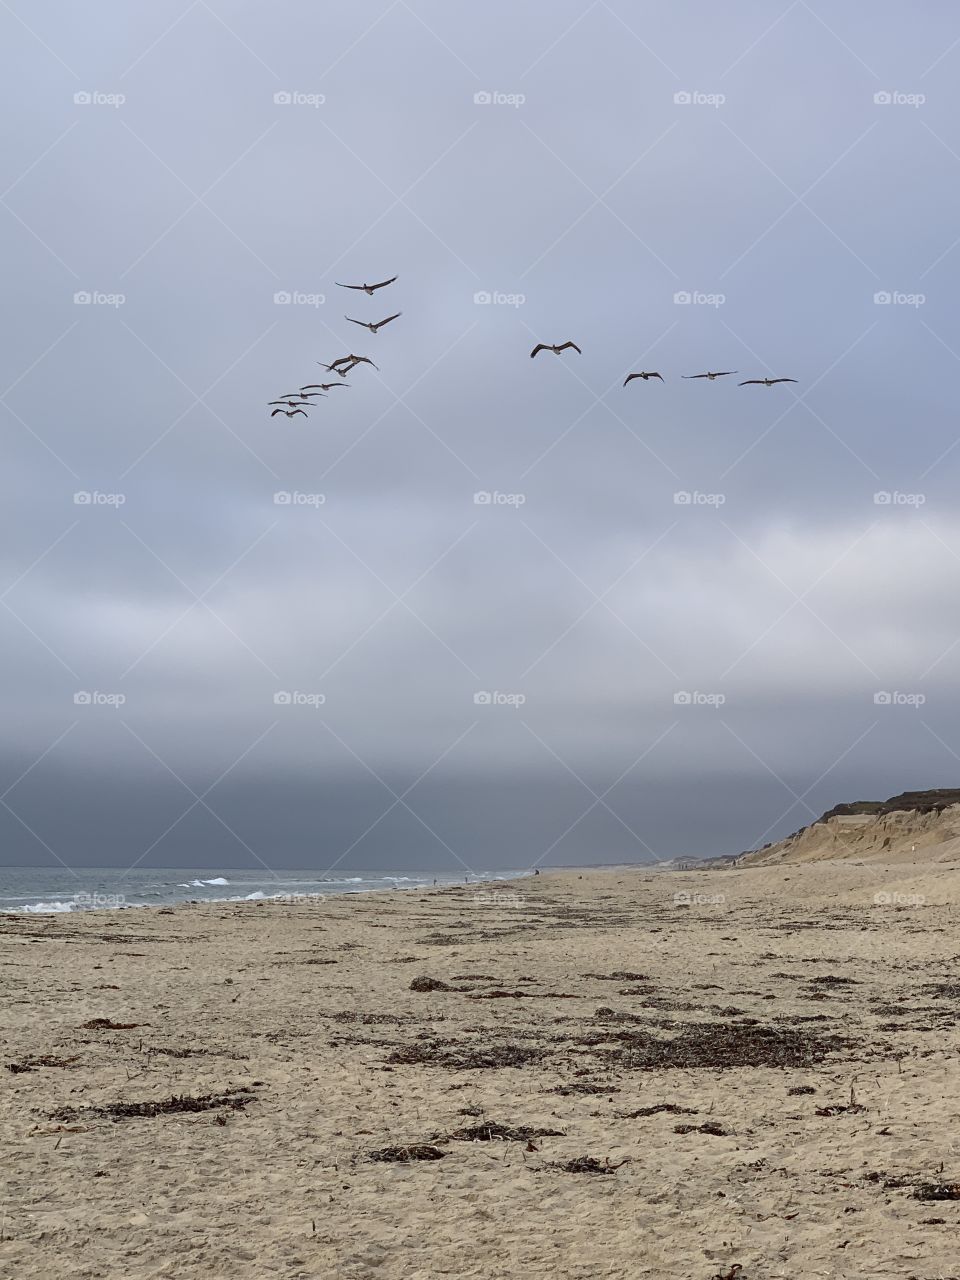 A flock of birds flying together over a beach with crashing waves